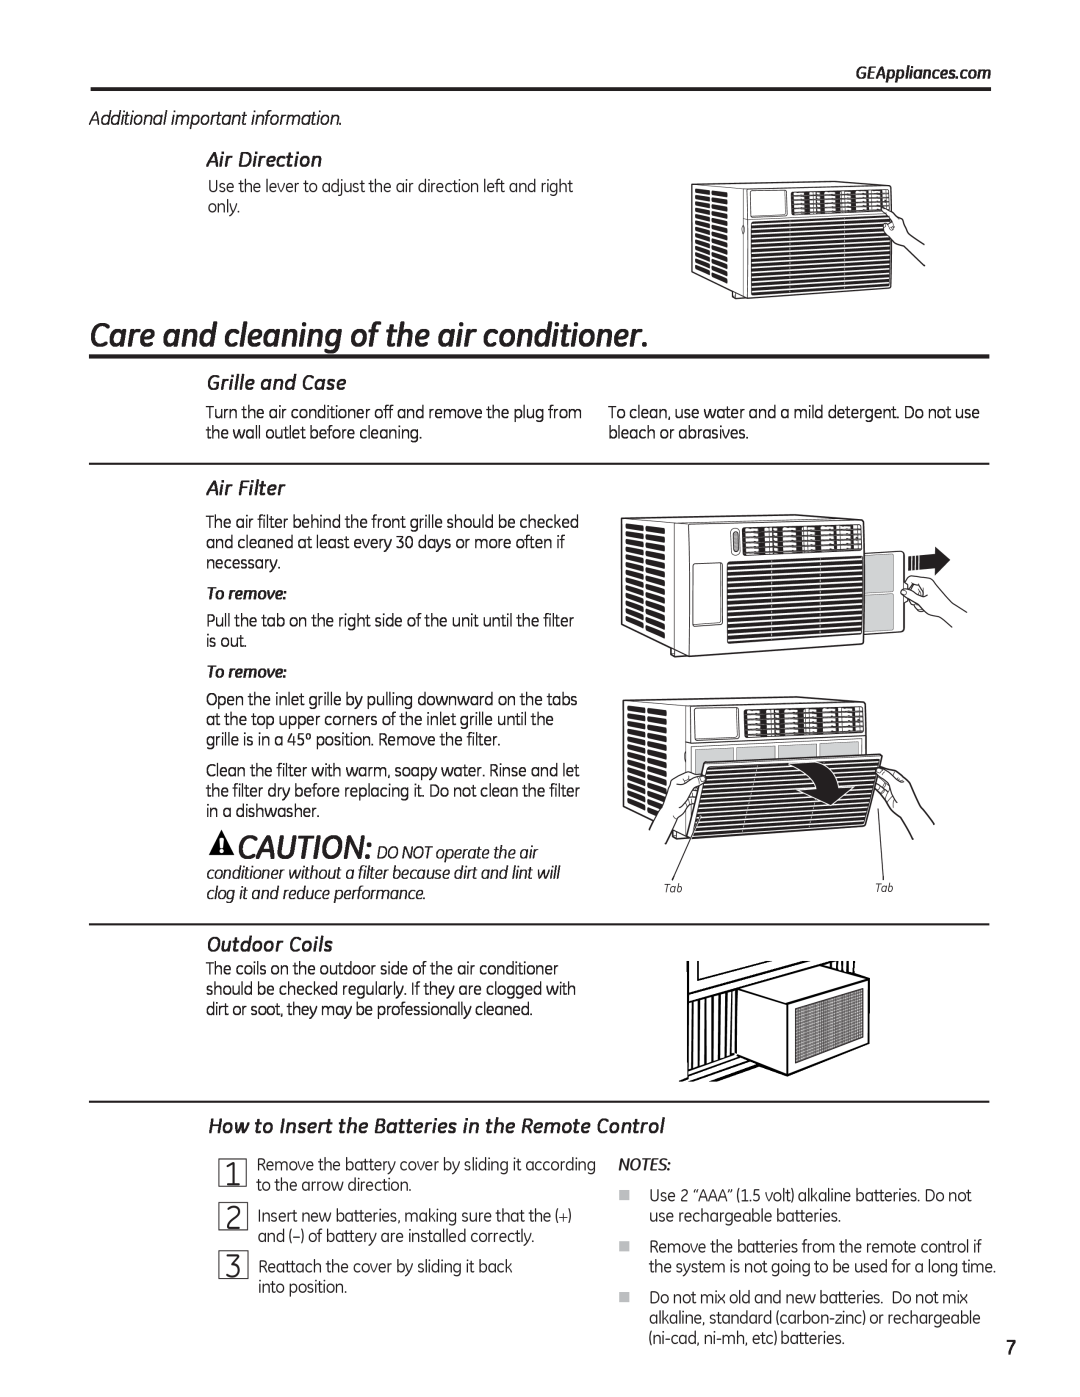 GE AEL06 Care and cleaning of the air conditioner, Air Direction, Grille and Case, Air Filter, Outdoor Coils, To remove 